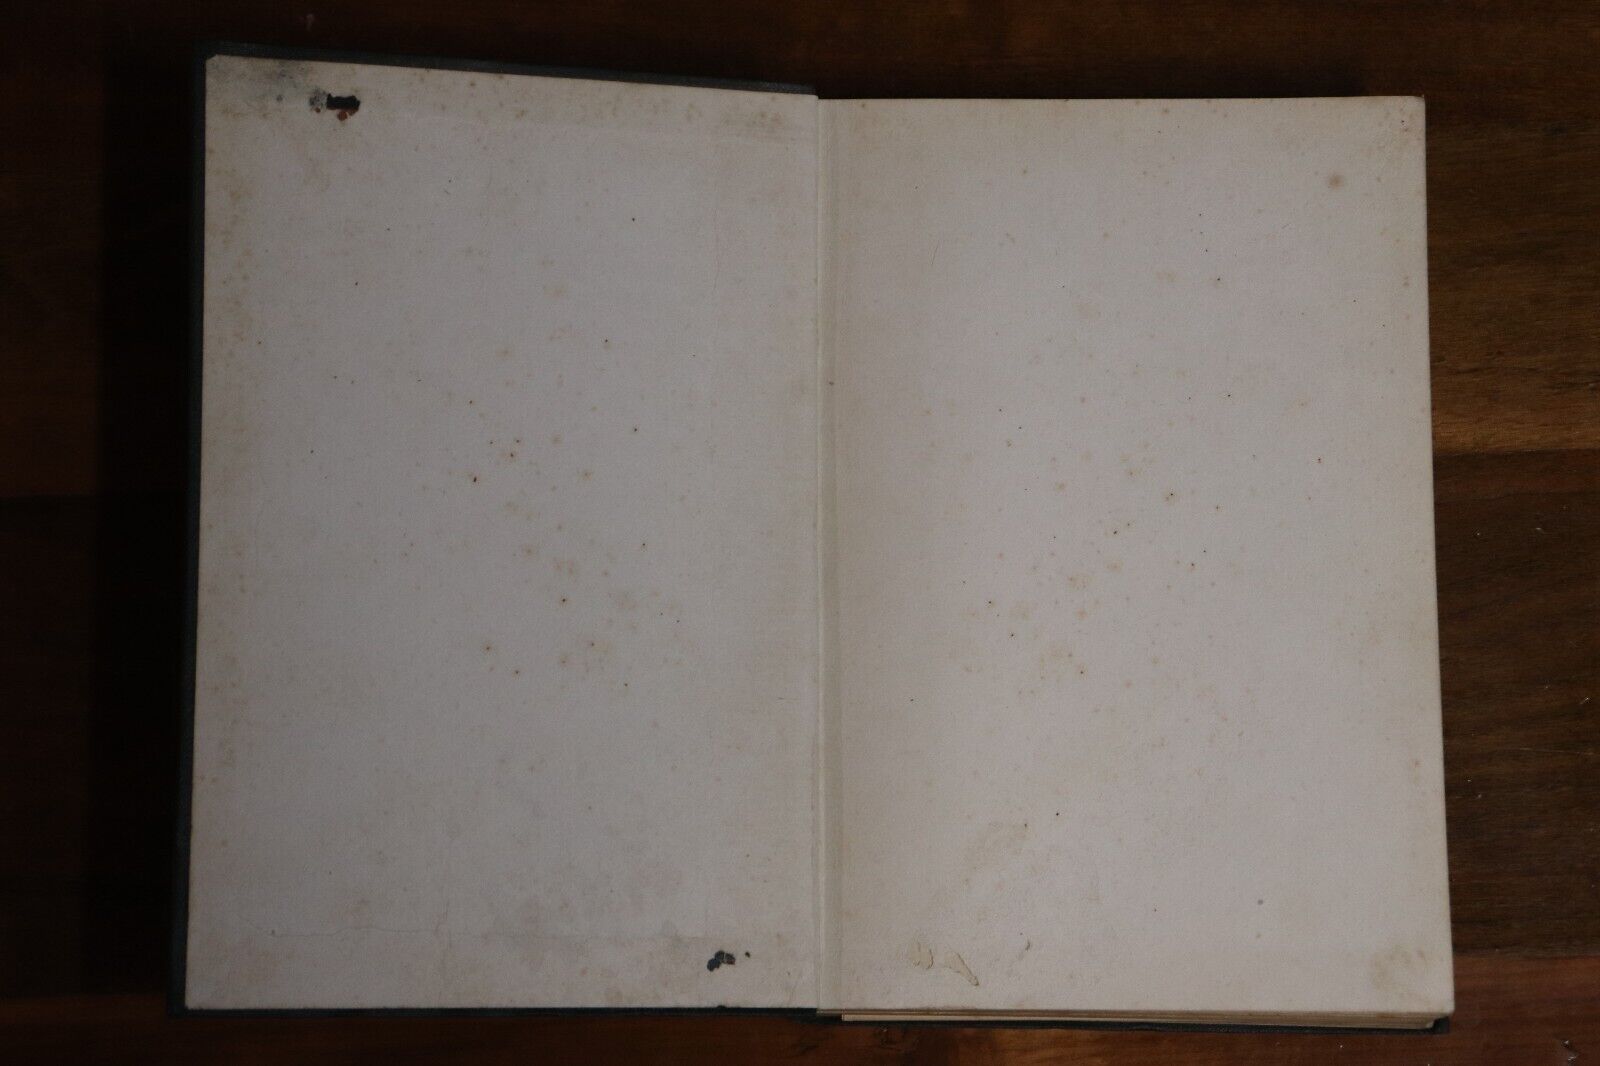 Automobile Starting Lighting & Ignition - 1917 - Antique Automotive Book